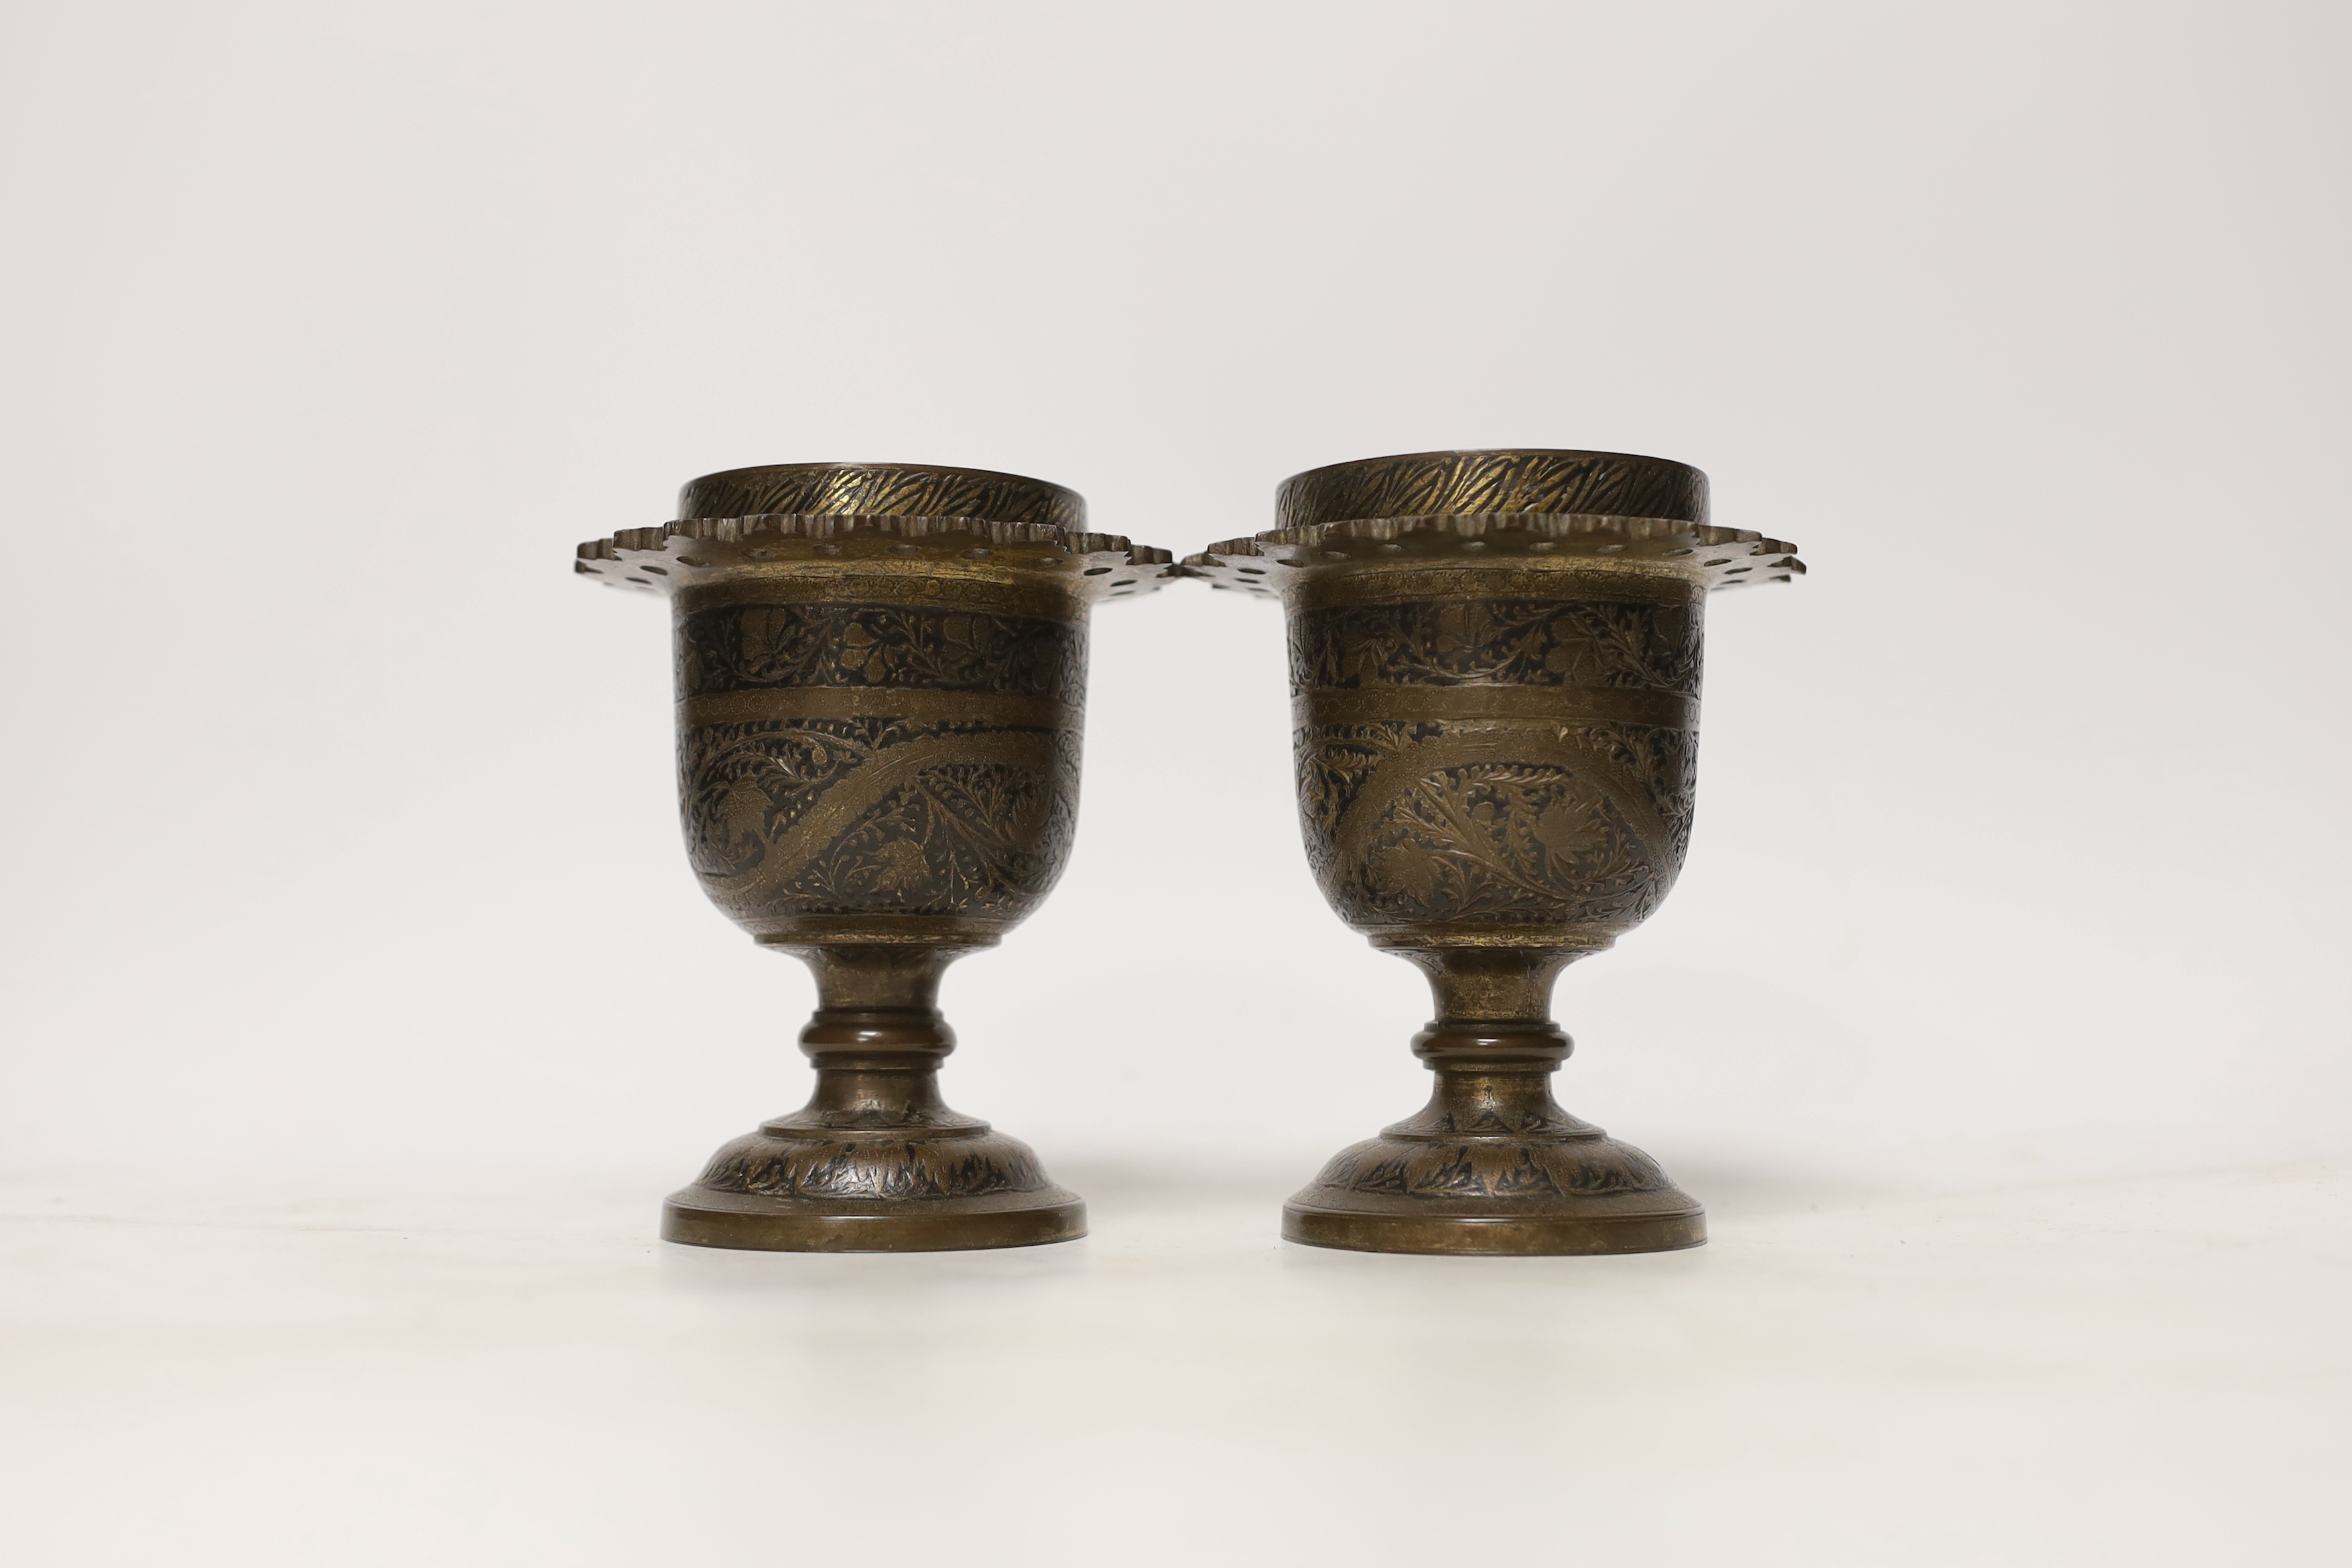 A pair of late 19th century Indian brass vases, 12cm high